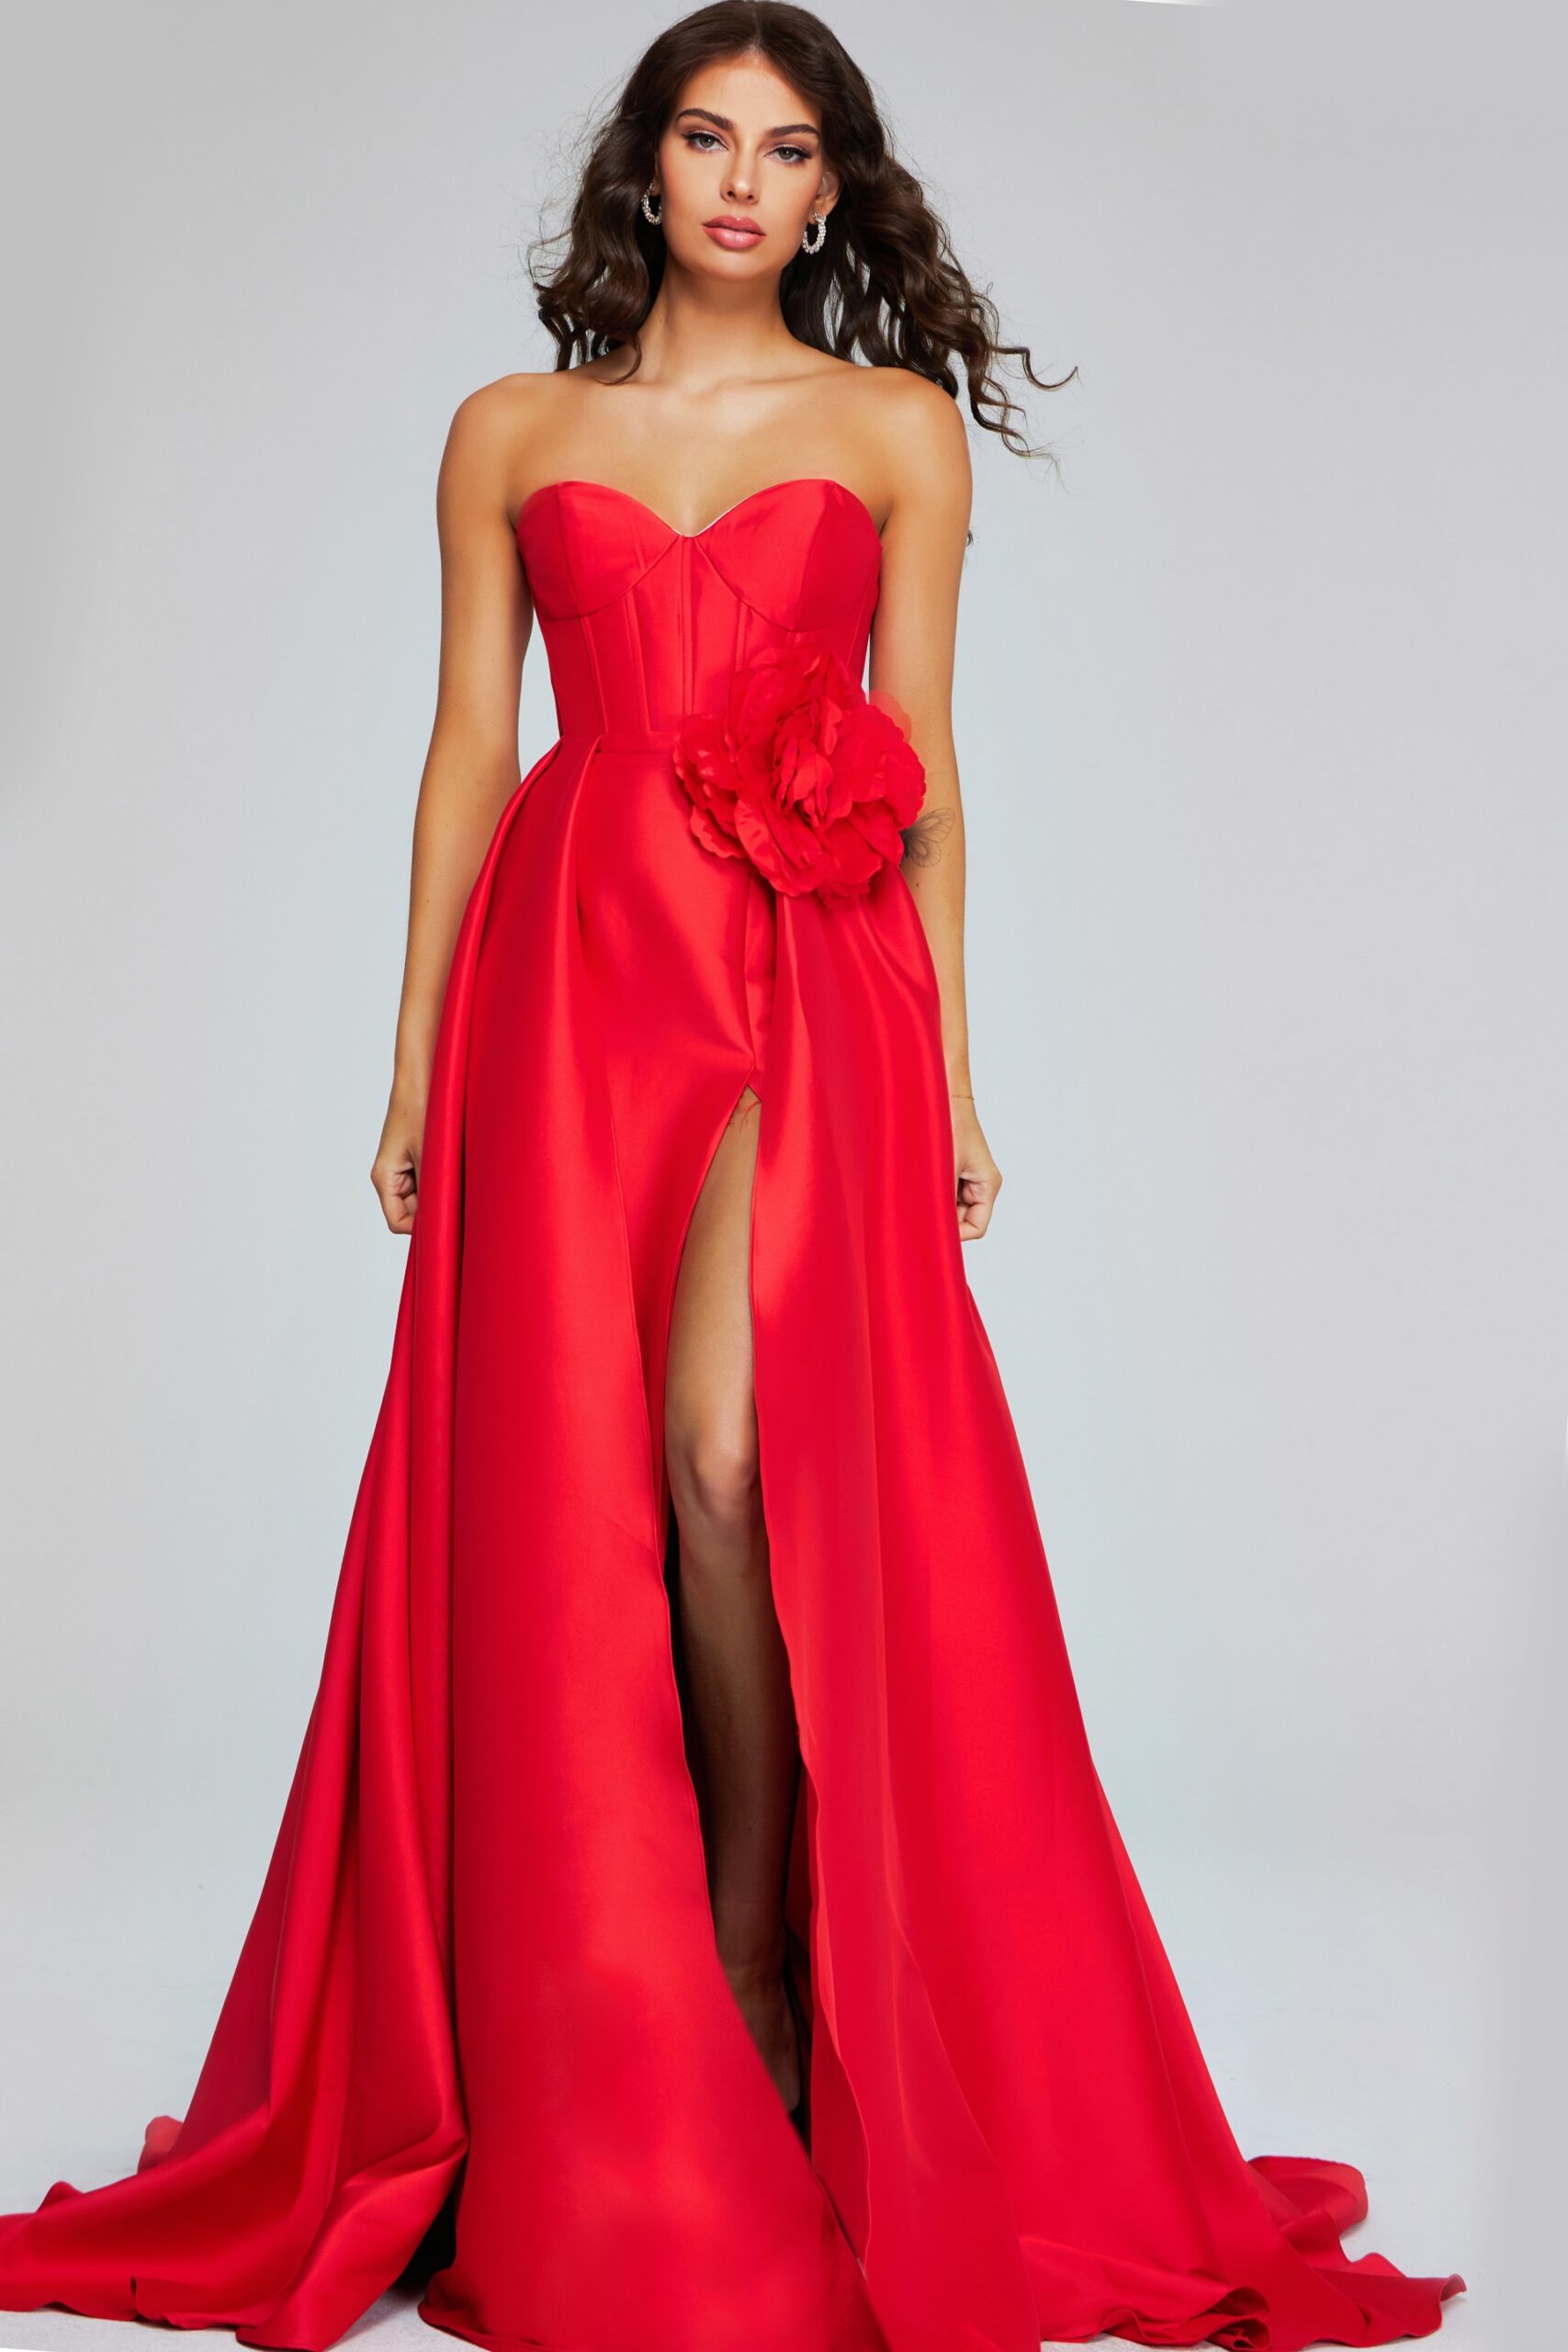 Stunning Red Strapless Gown with High Slit and Floral Accent 40826